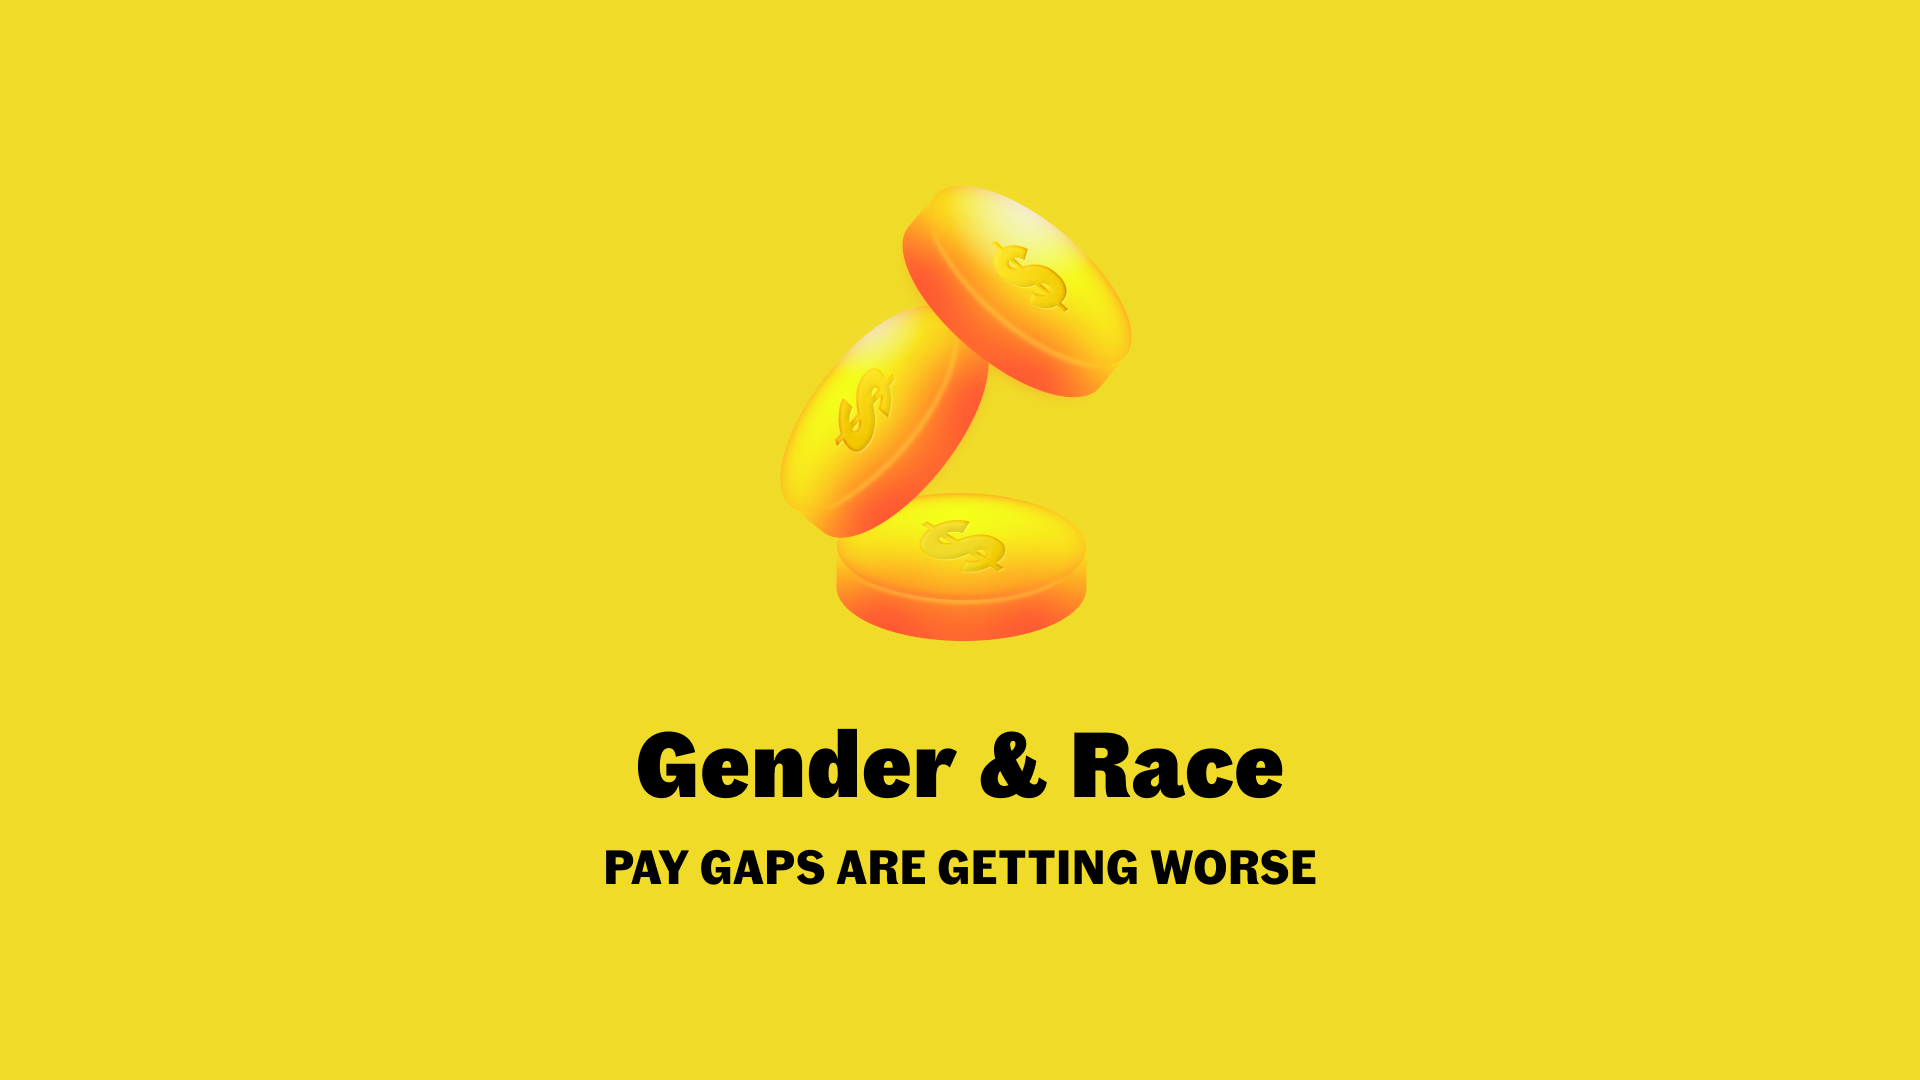 Revealed:  Gender and race pay gaps are widening at an alarming rate.